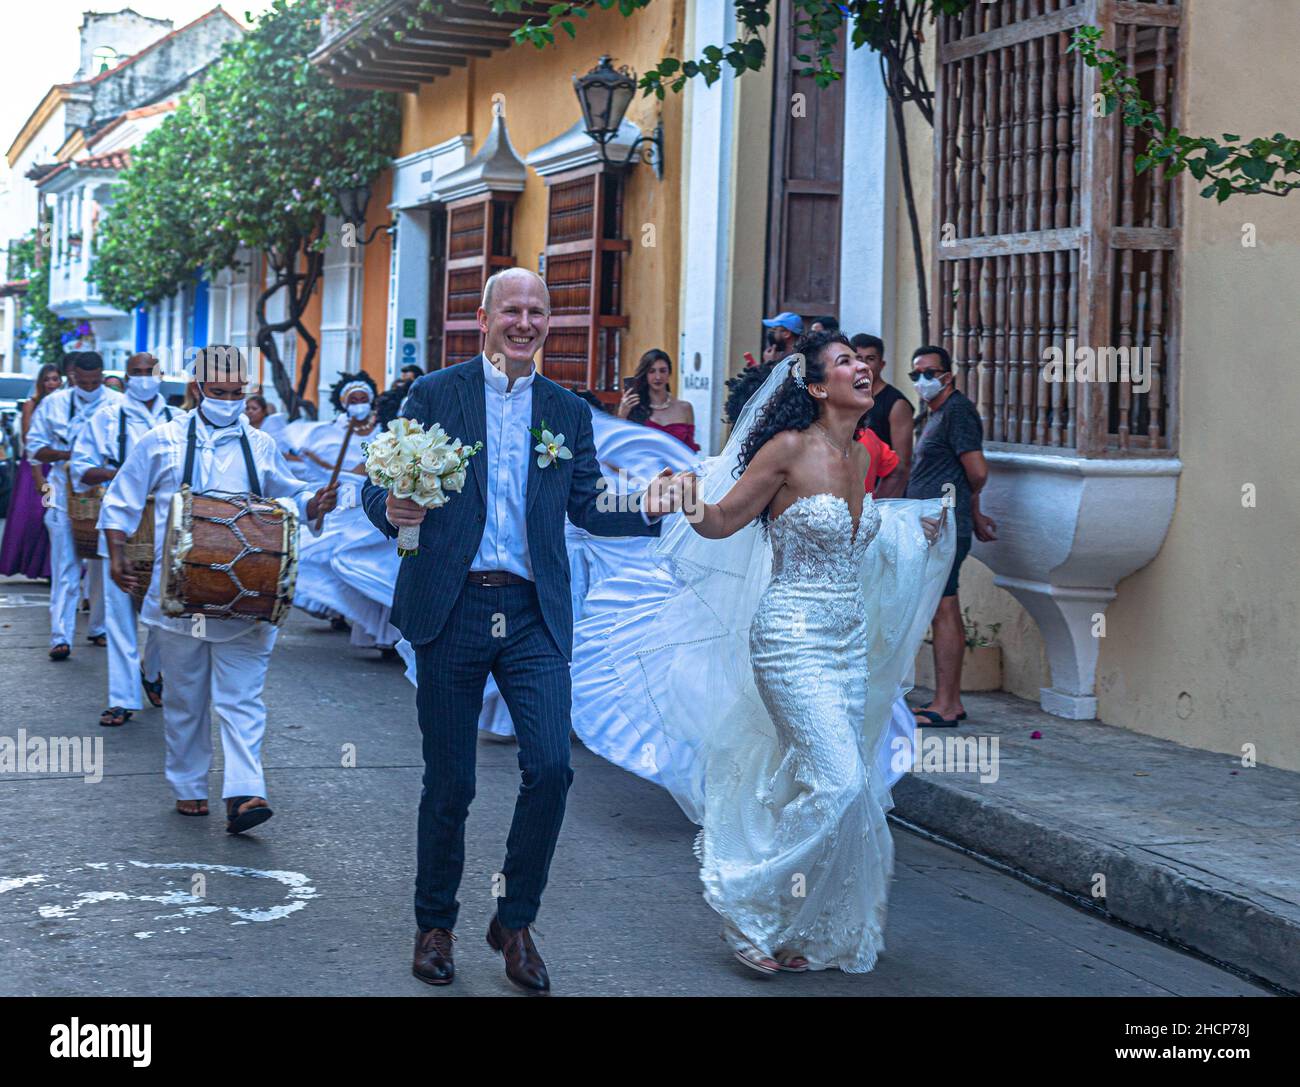 Newlywed couple celebrating their marriage dancing on the street to a live traditional band, Cartagena de Indias, Colombia. Stock Photo